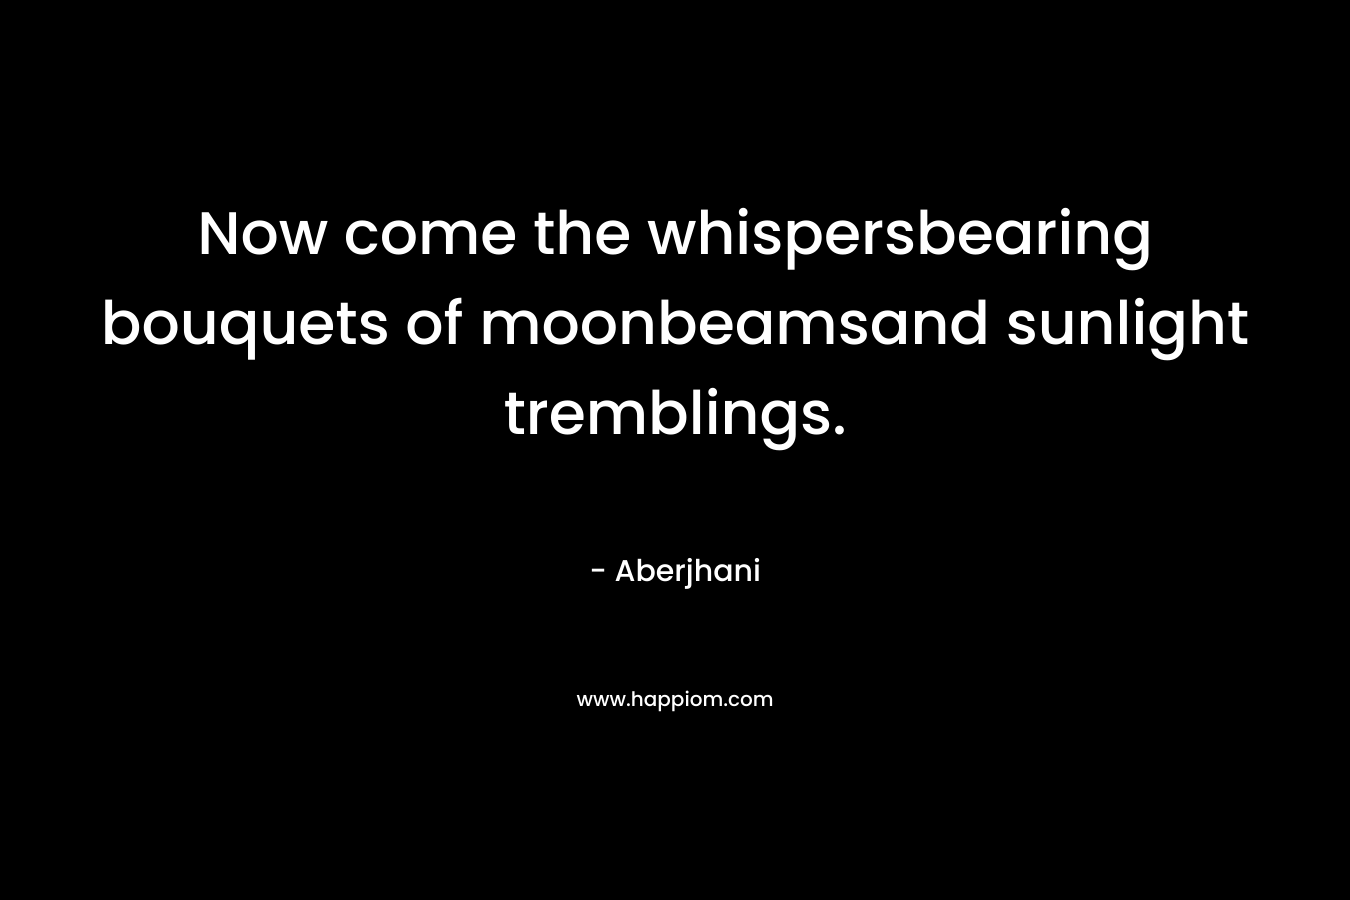 Now come the whispersbearing bouquets of moonbeamsand sunlight tremblings. – Aberjhani